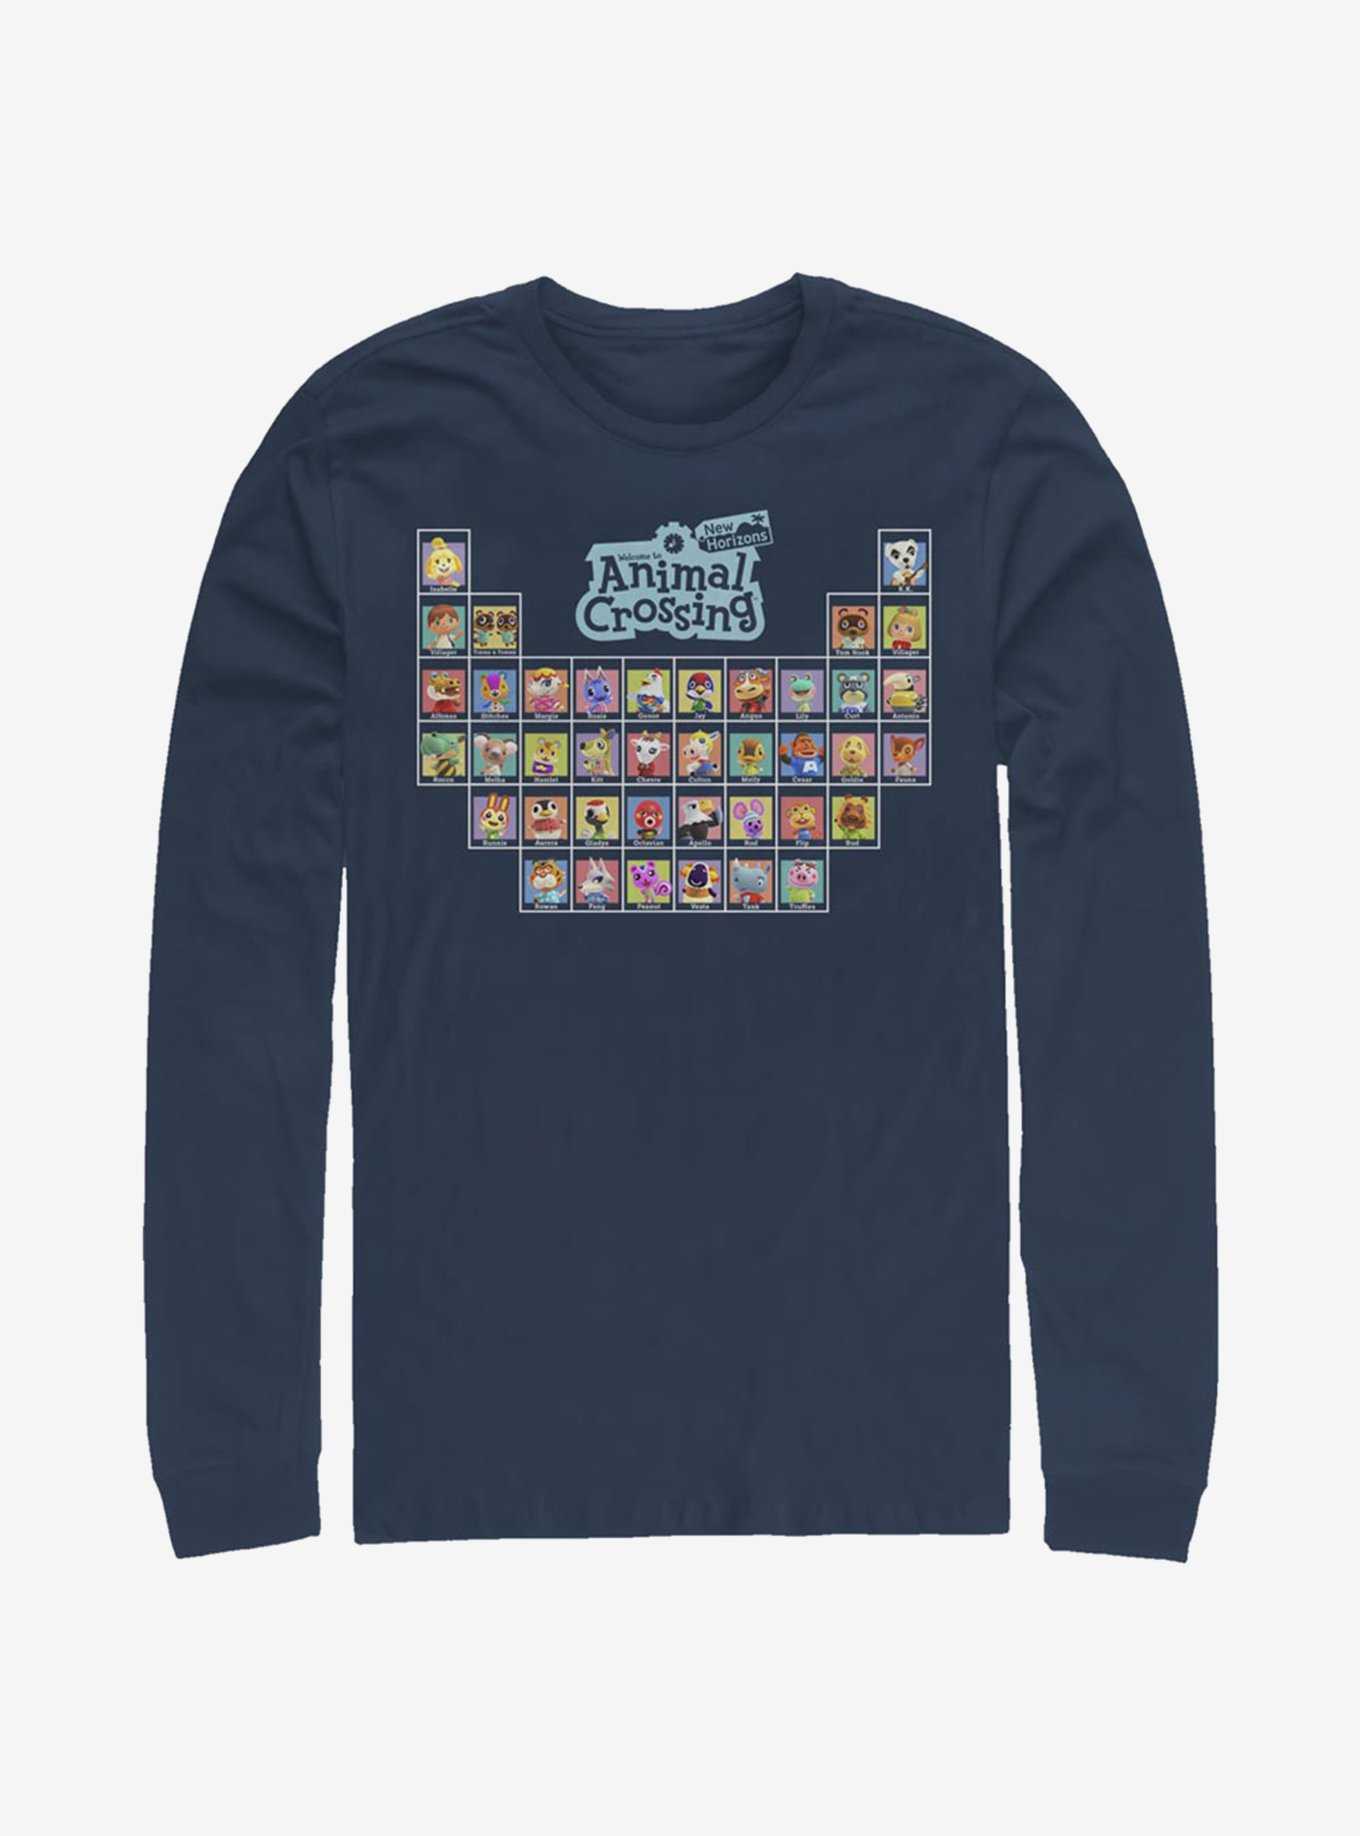 Animal Crossing Periodically Crossing Long-Sleeve T-Shirt, , hi-res